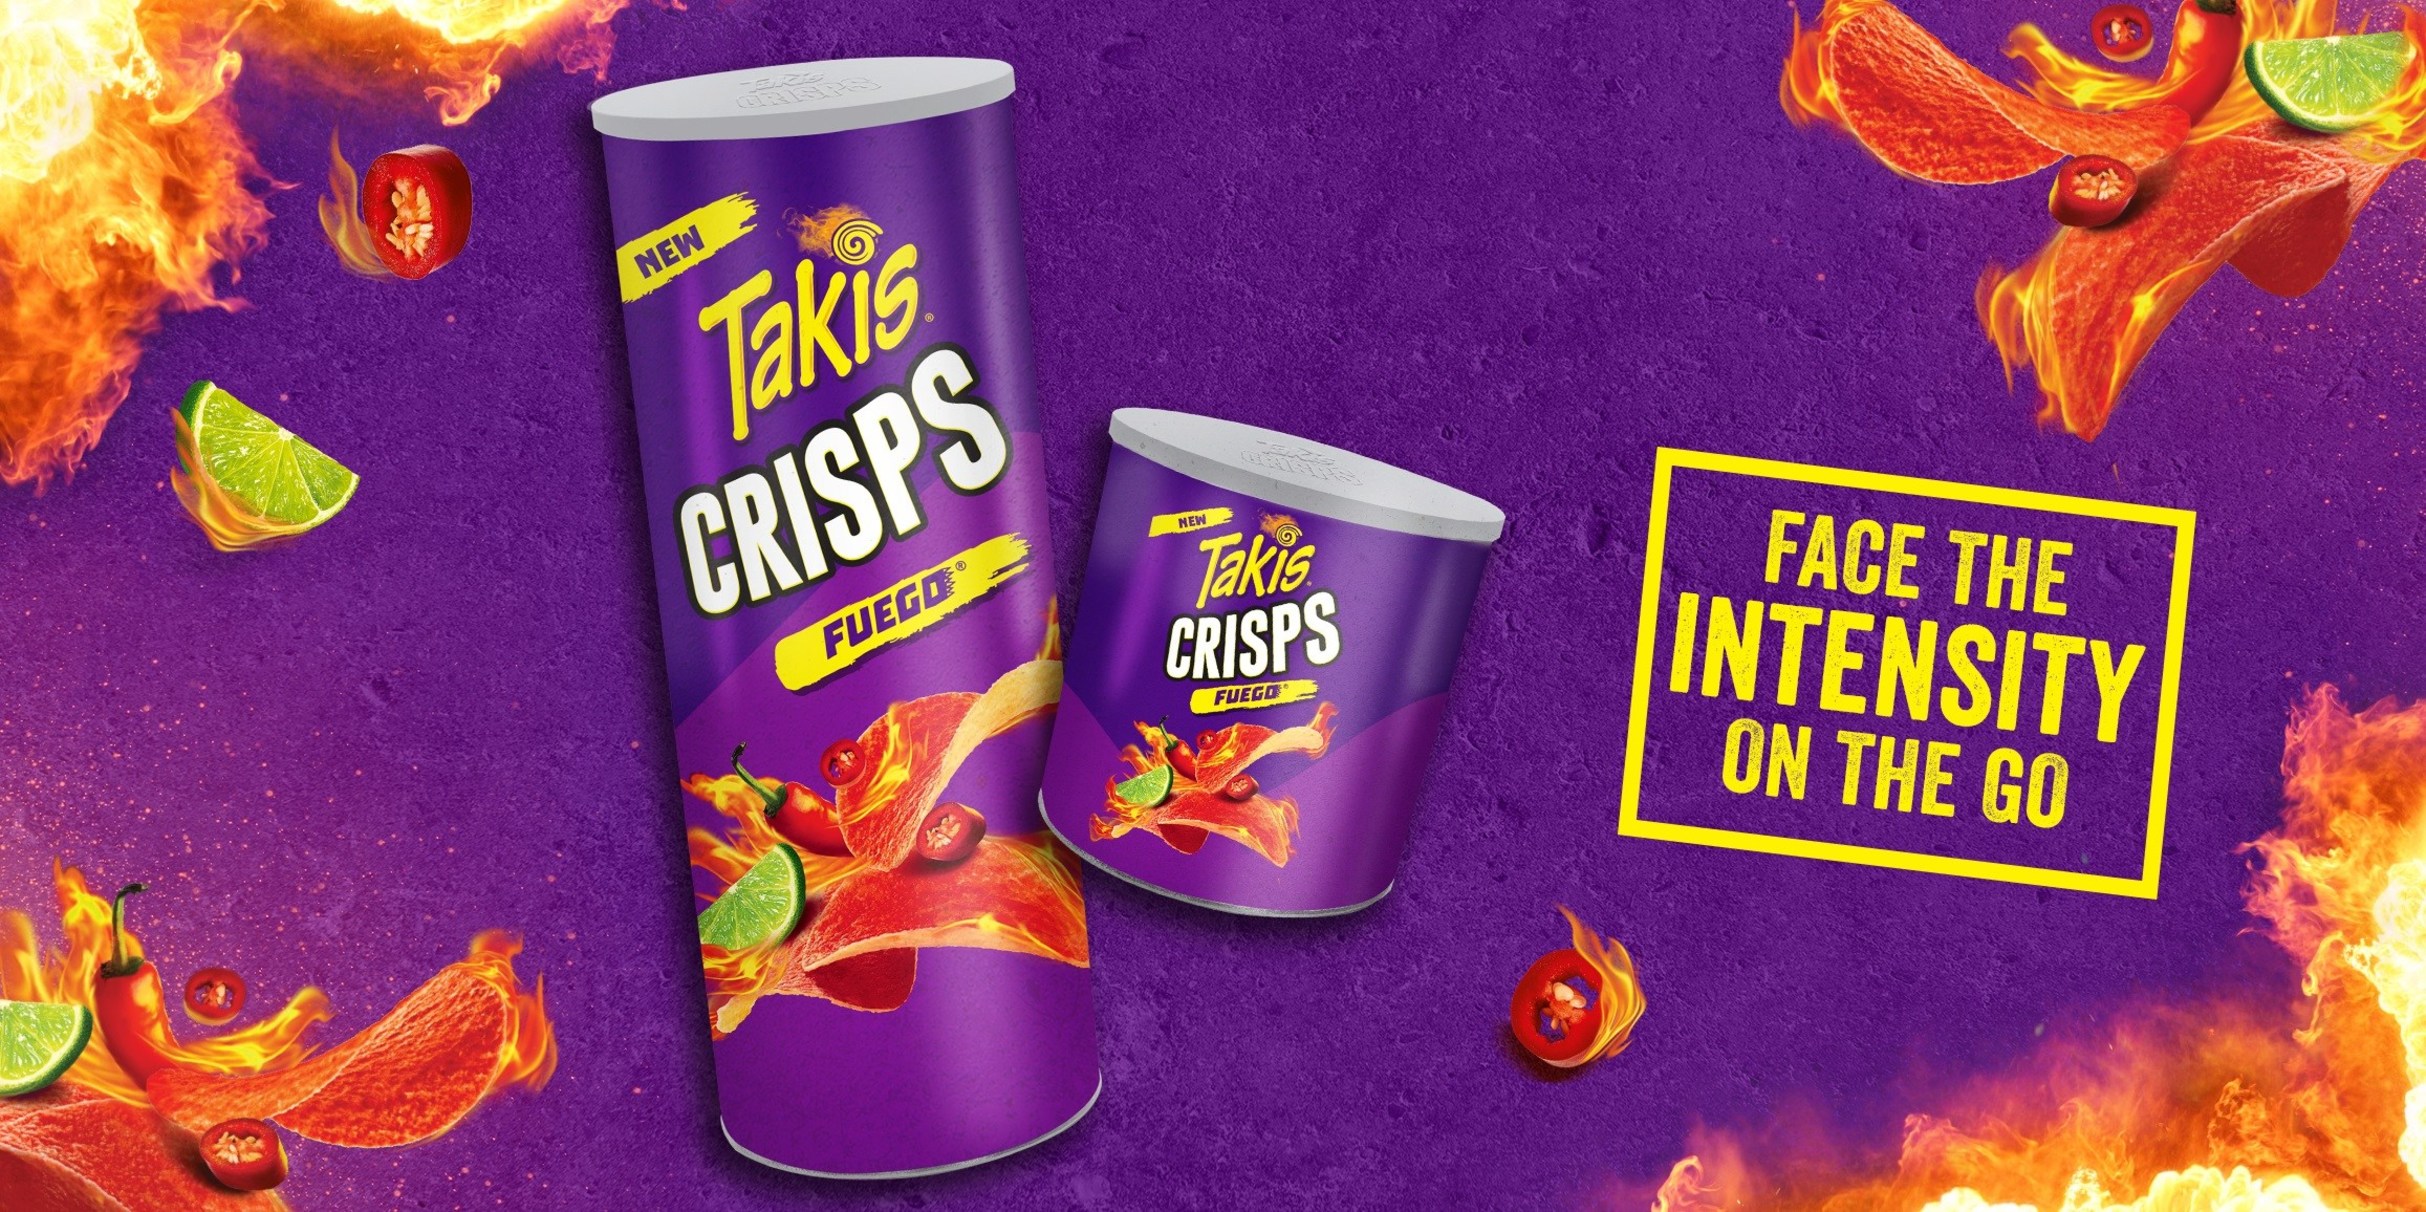 Takis® Introduces OntheGo Intensity with New Takis® Crisps